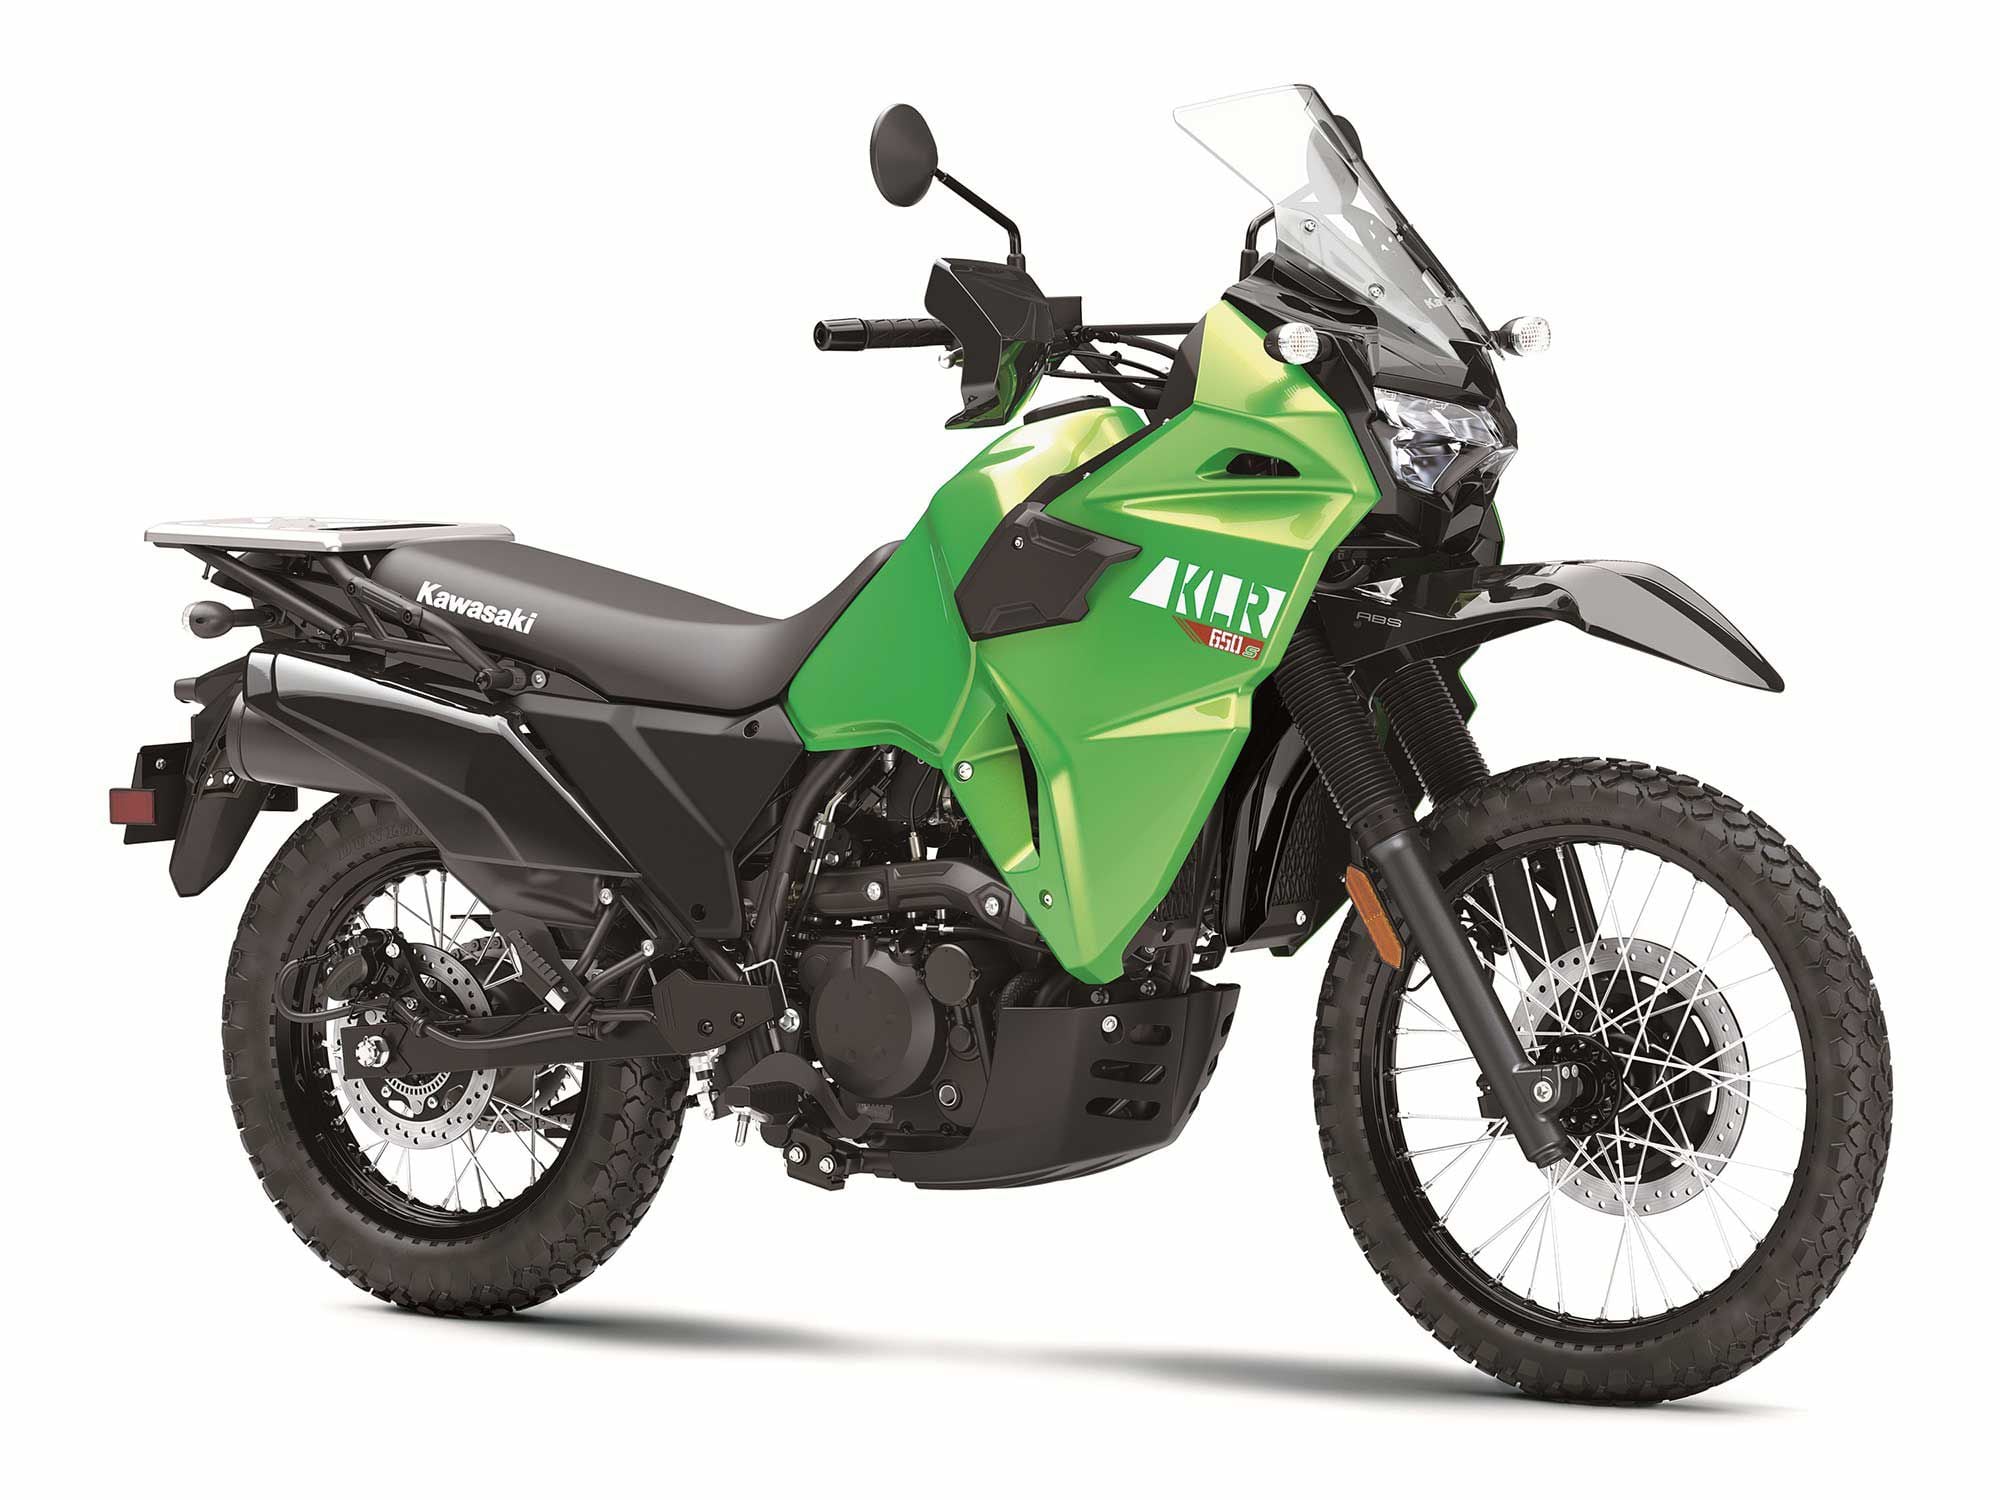 A 2-inch-lower seat height and shortened suspension help make the new 2023 Kawasaki KLR650 S both more rider-friendly and pavement capable.